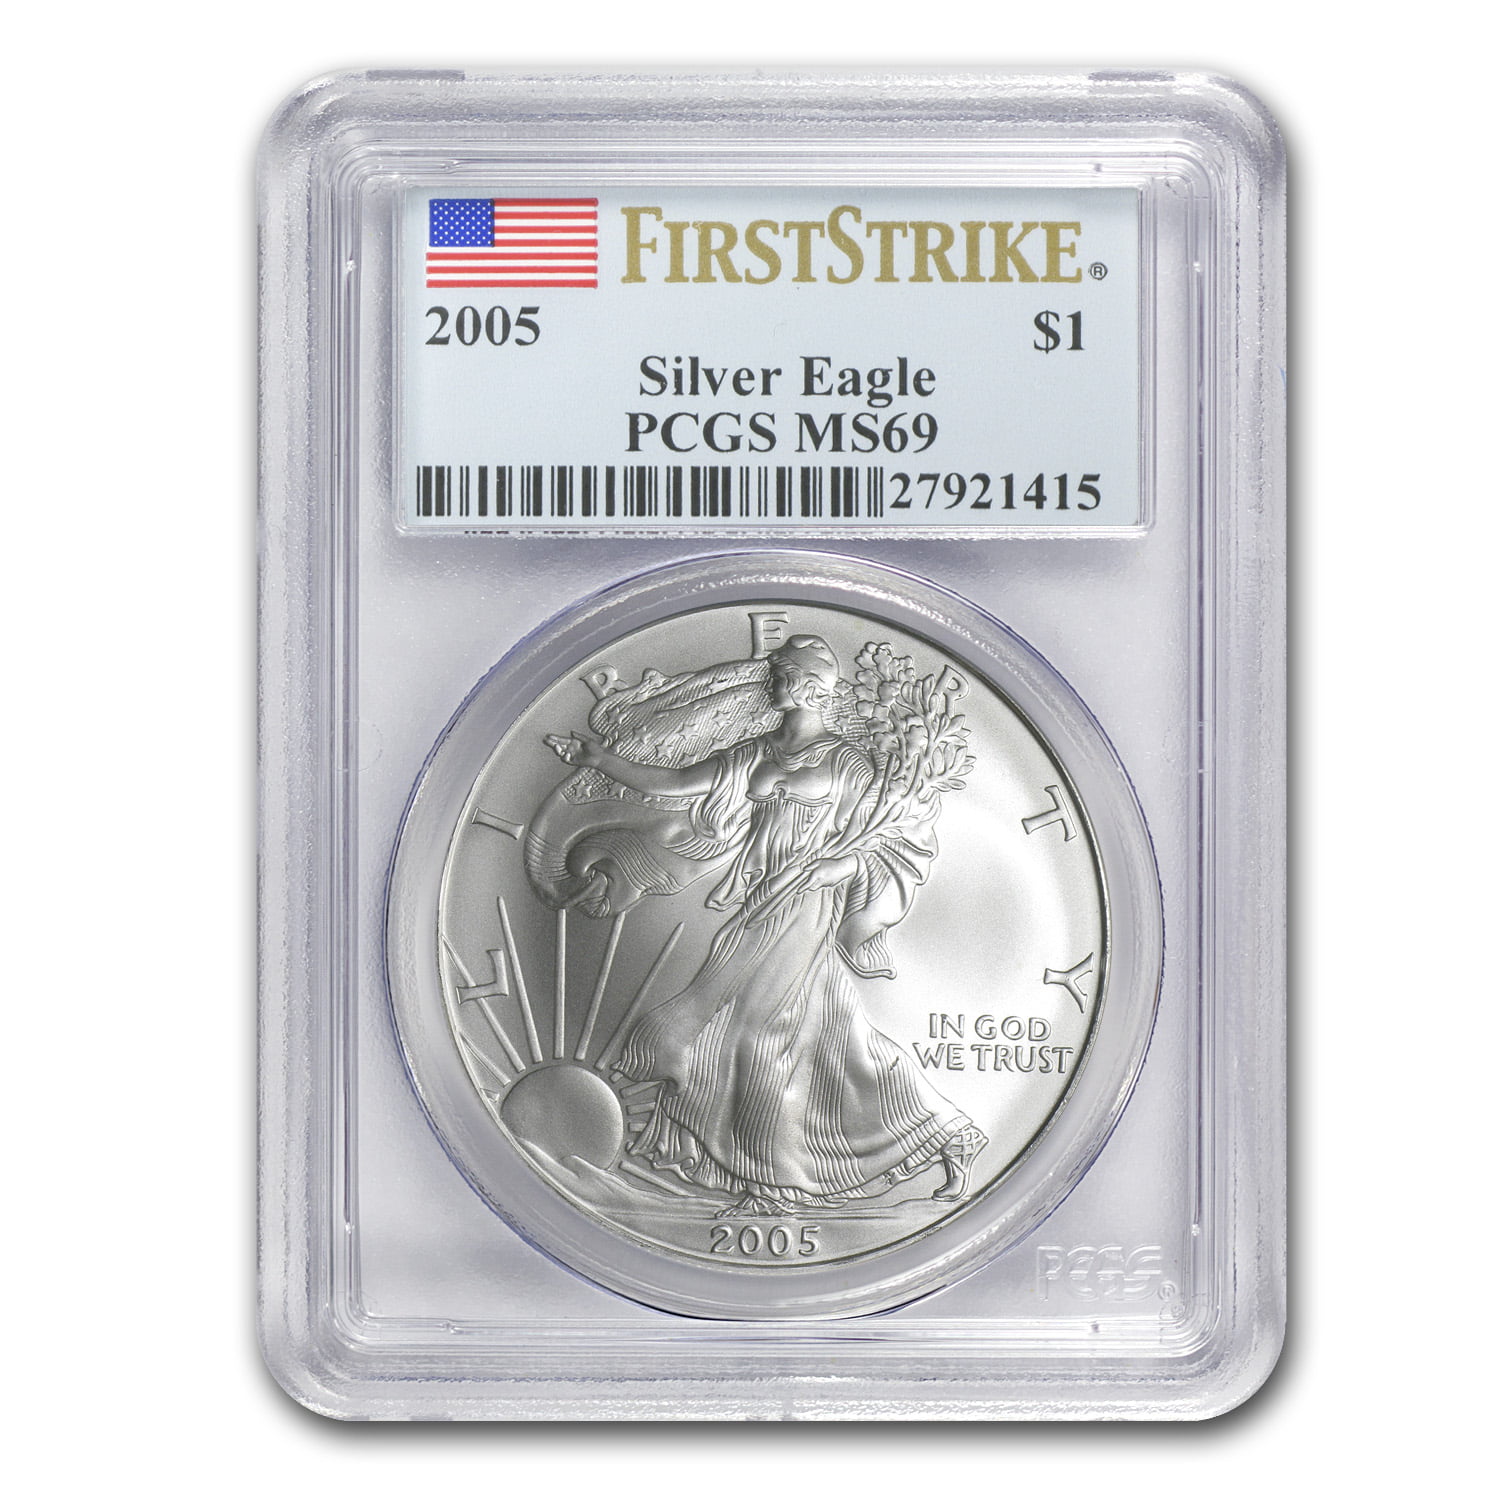 UNITED STATES 2005 SILVER EAGLE PCGS MS 69 $ 1 DOLLAR COIN 